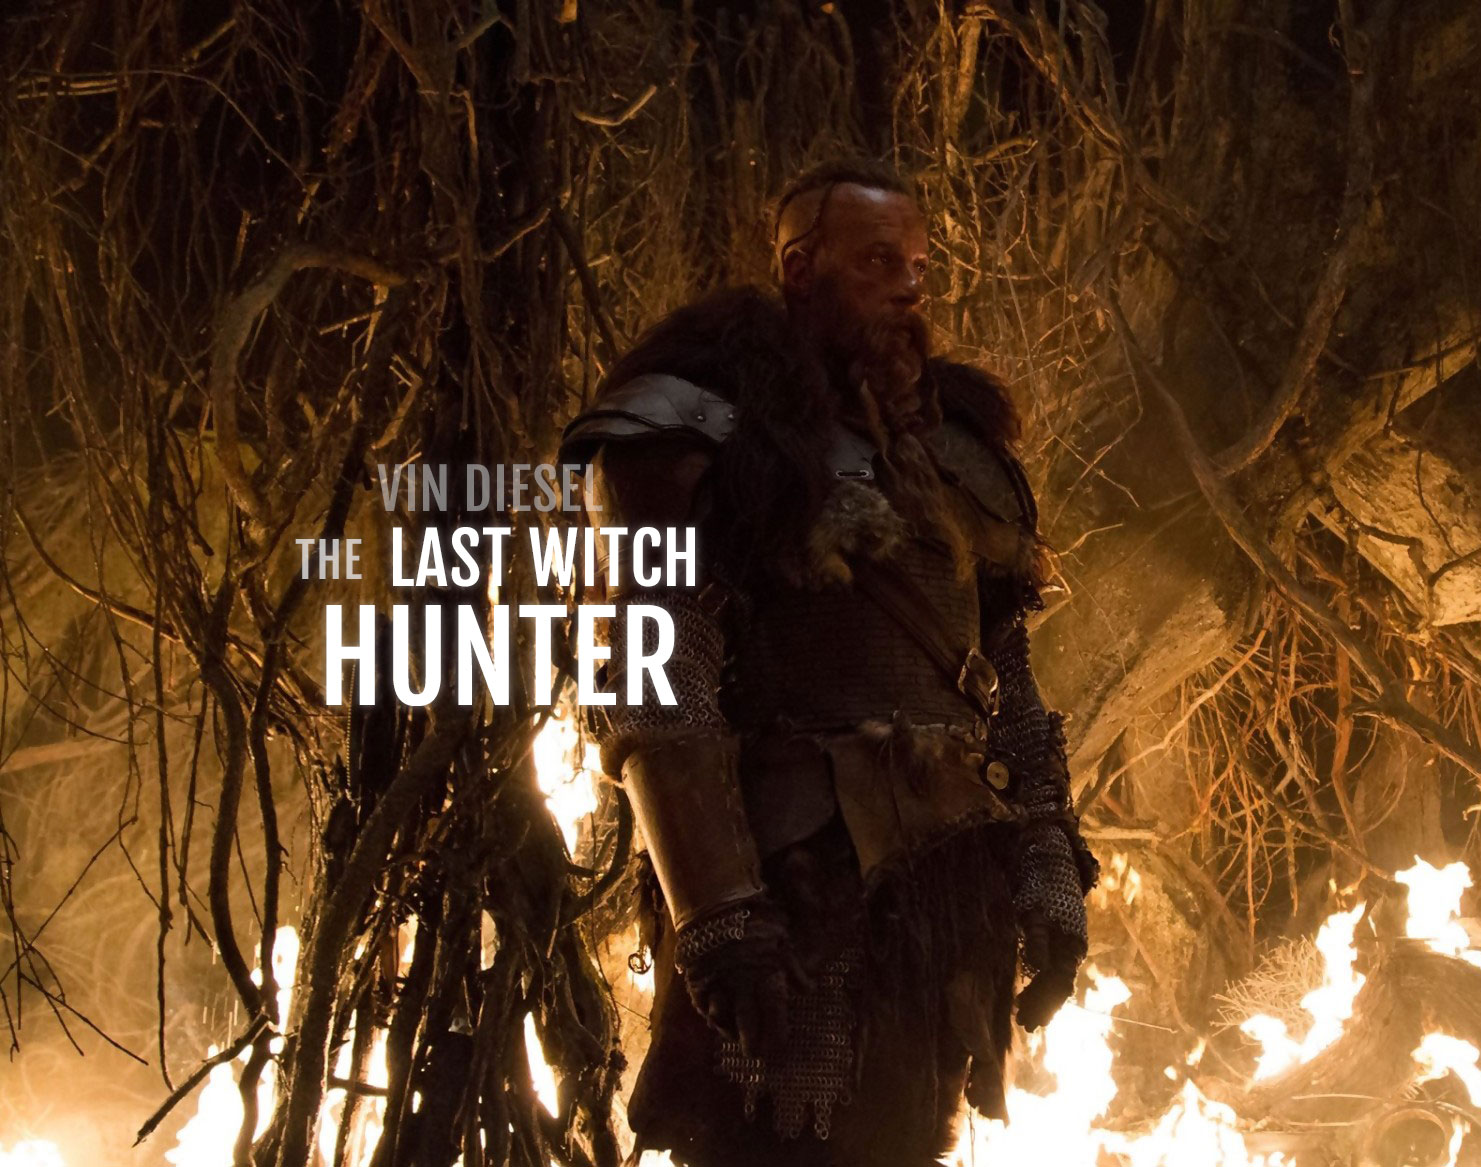 download the movie the last witch hunter